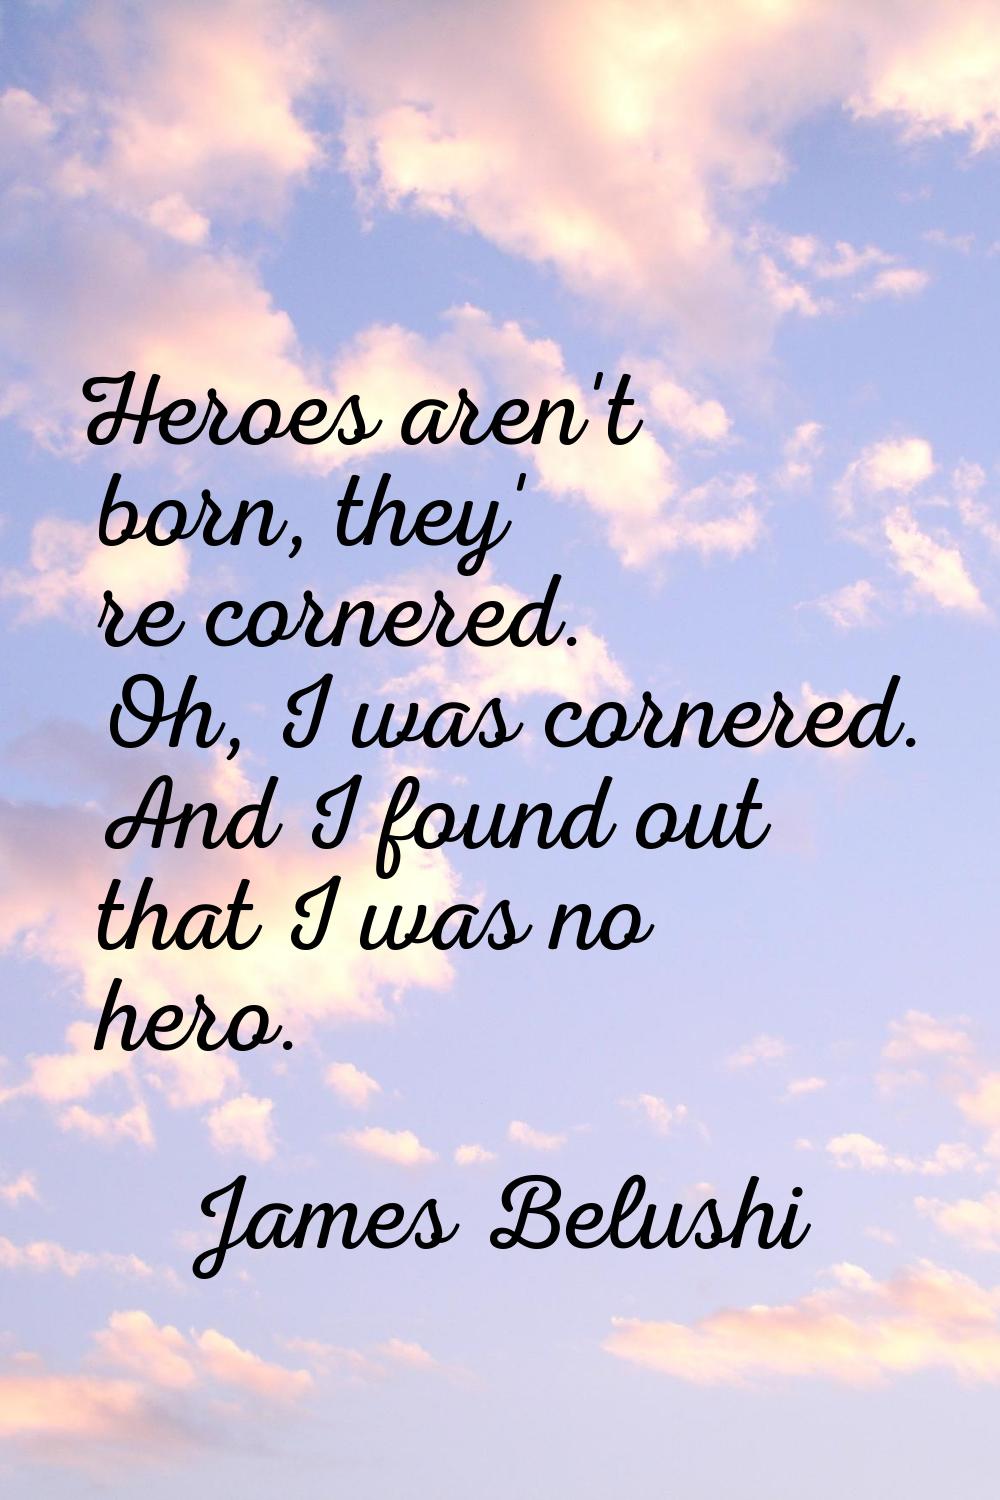 Heroes aren't born, they' re cornered. Oh, I was cornered. And I found out that I was no hero.